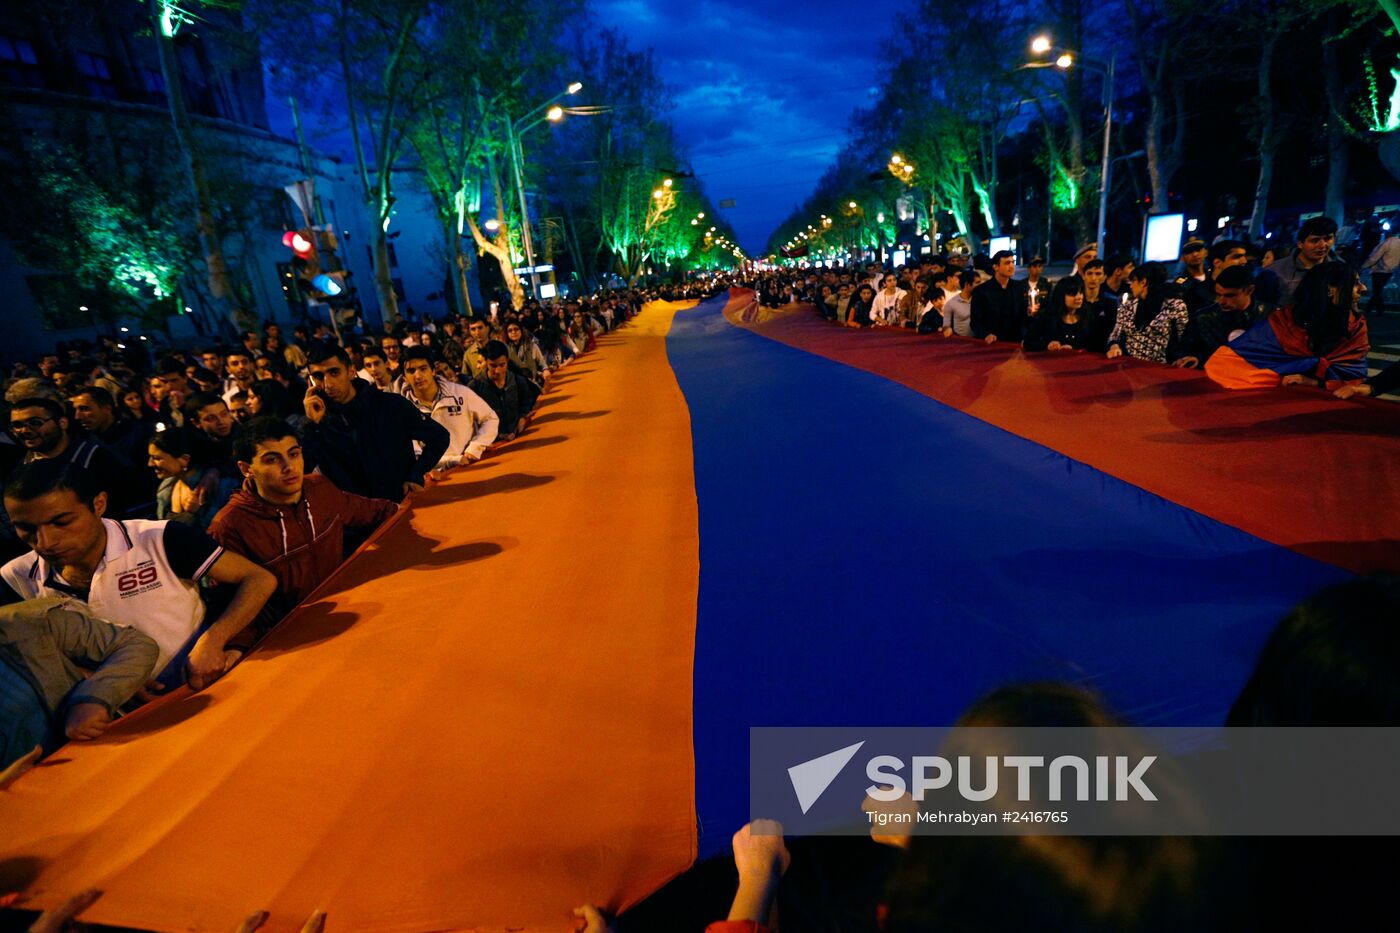 March in memory of 1915 Armenian Genocide